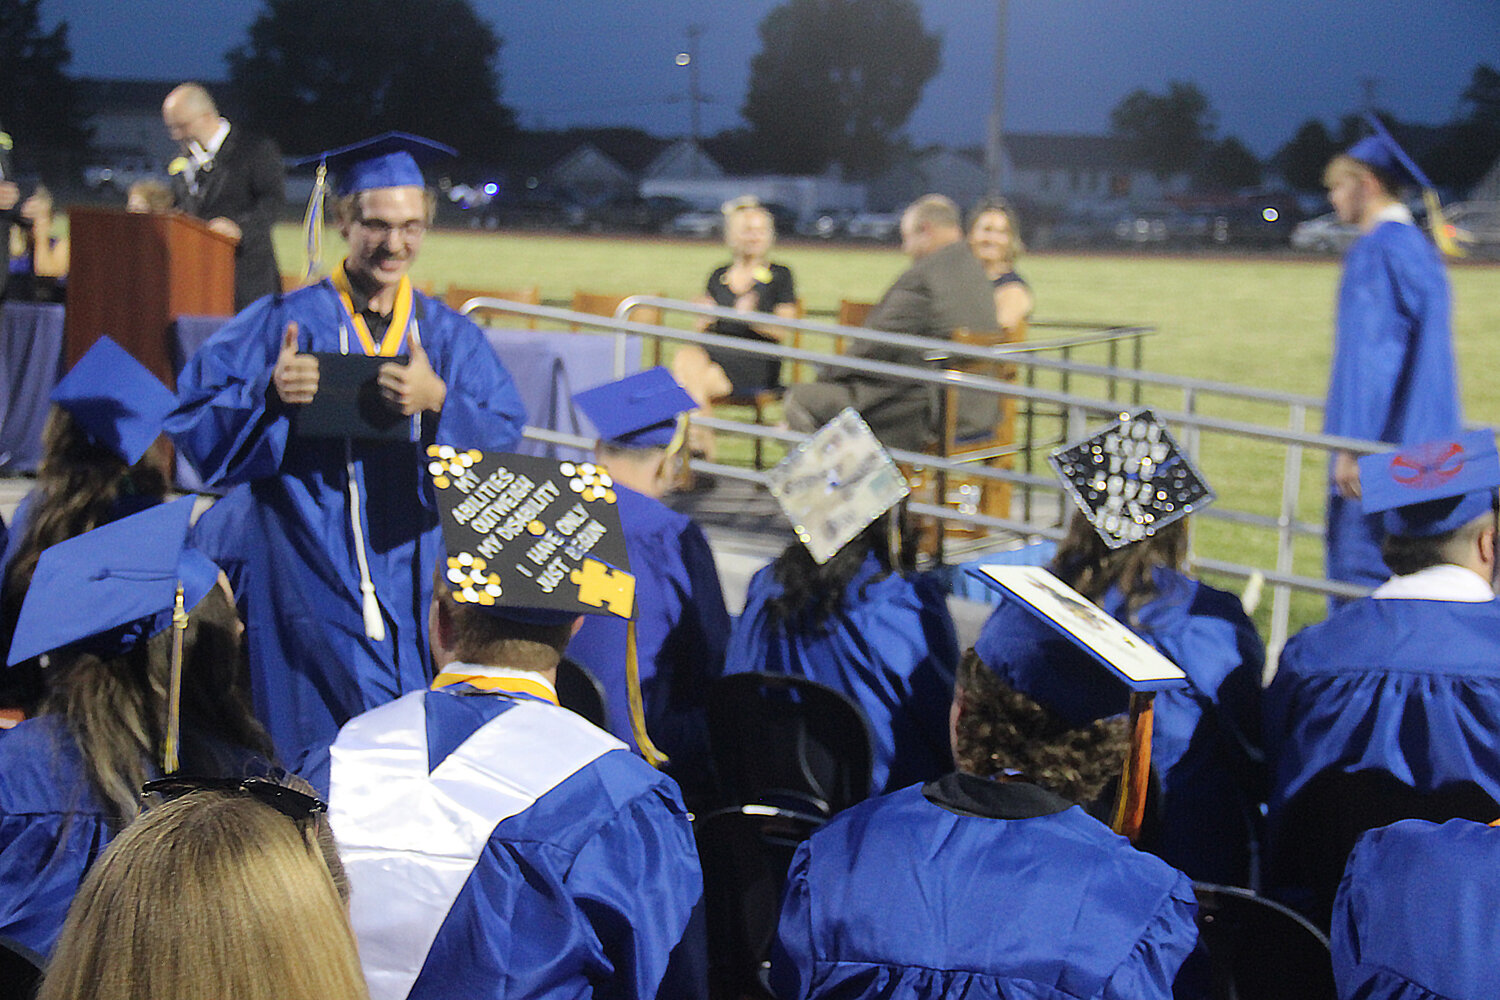 A senior gives a thumbs up as he returns to his seat after receiving his diploma cover during the Wright City High School graduation ceremony on June 2.